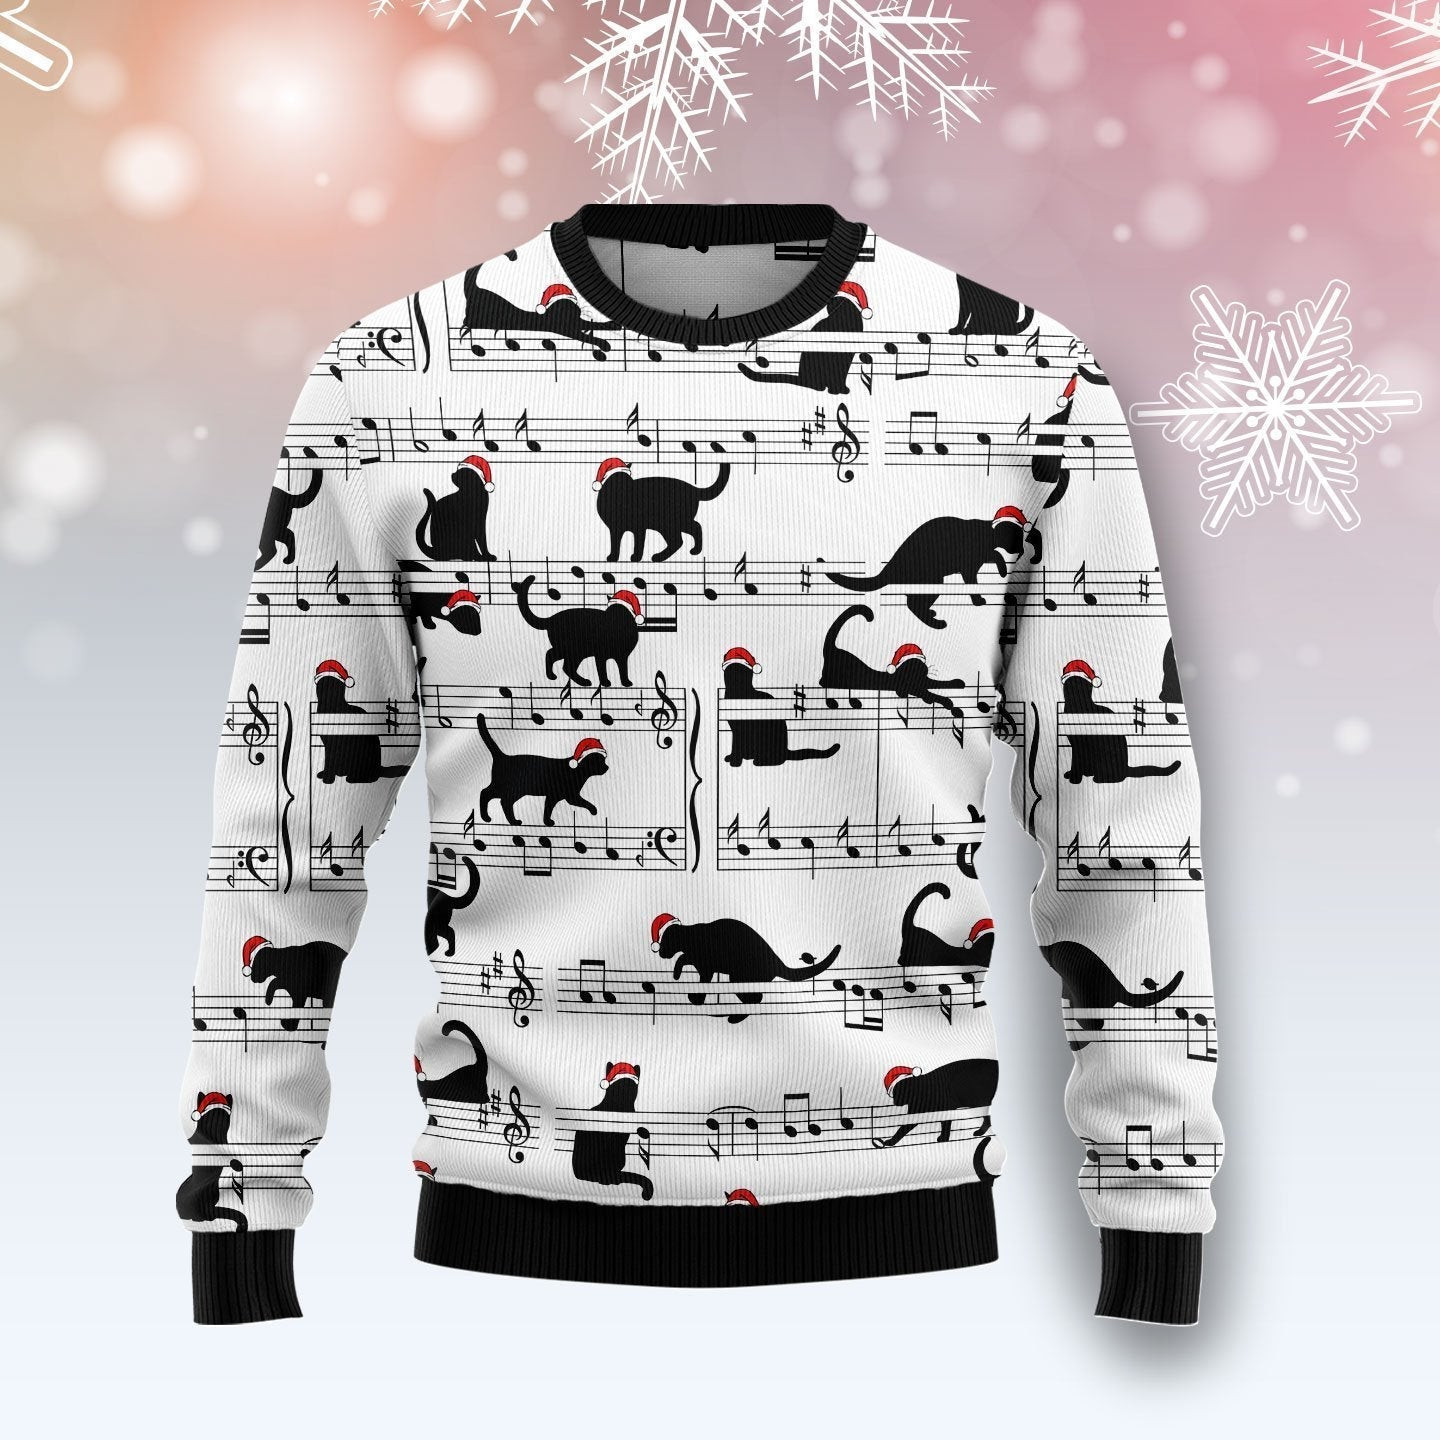 Black Cat Christmas Music Ugly Christmas Sweater, Ugly Sweater For Men Women, Holiday Sweater